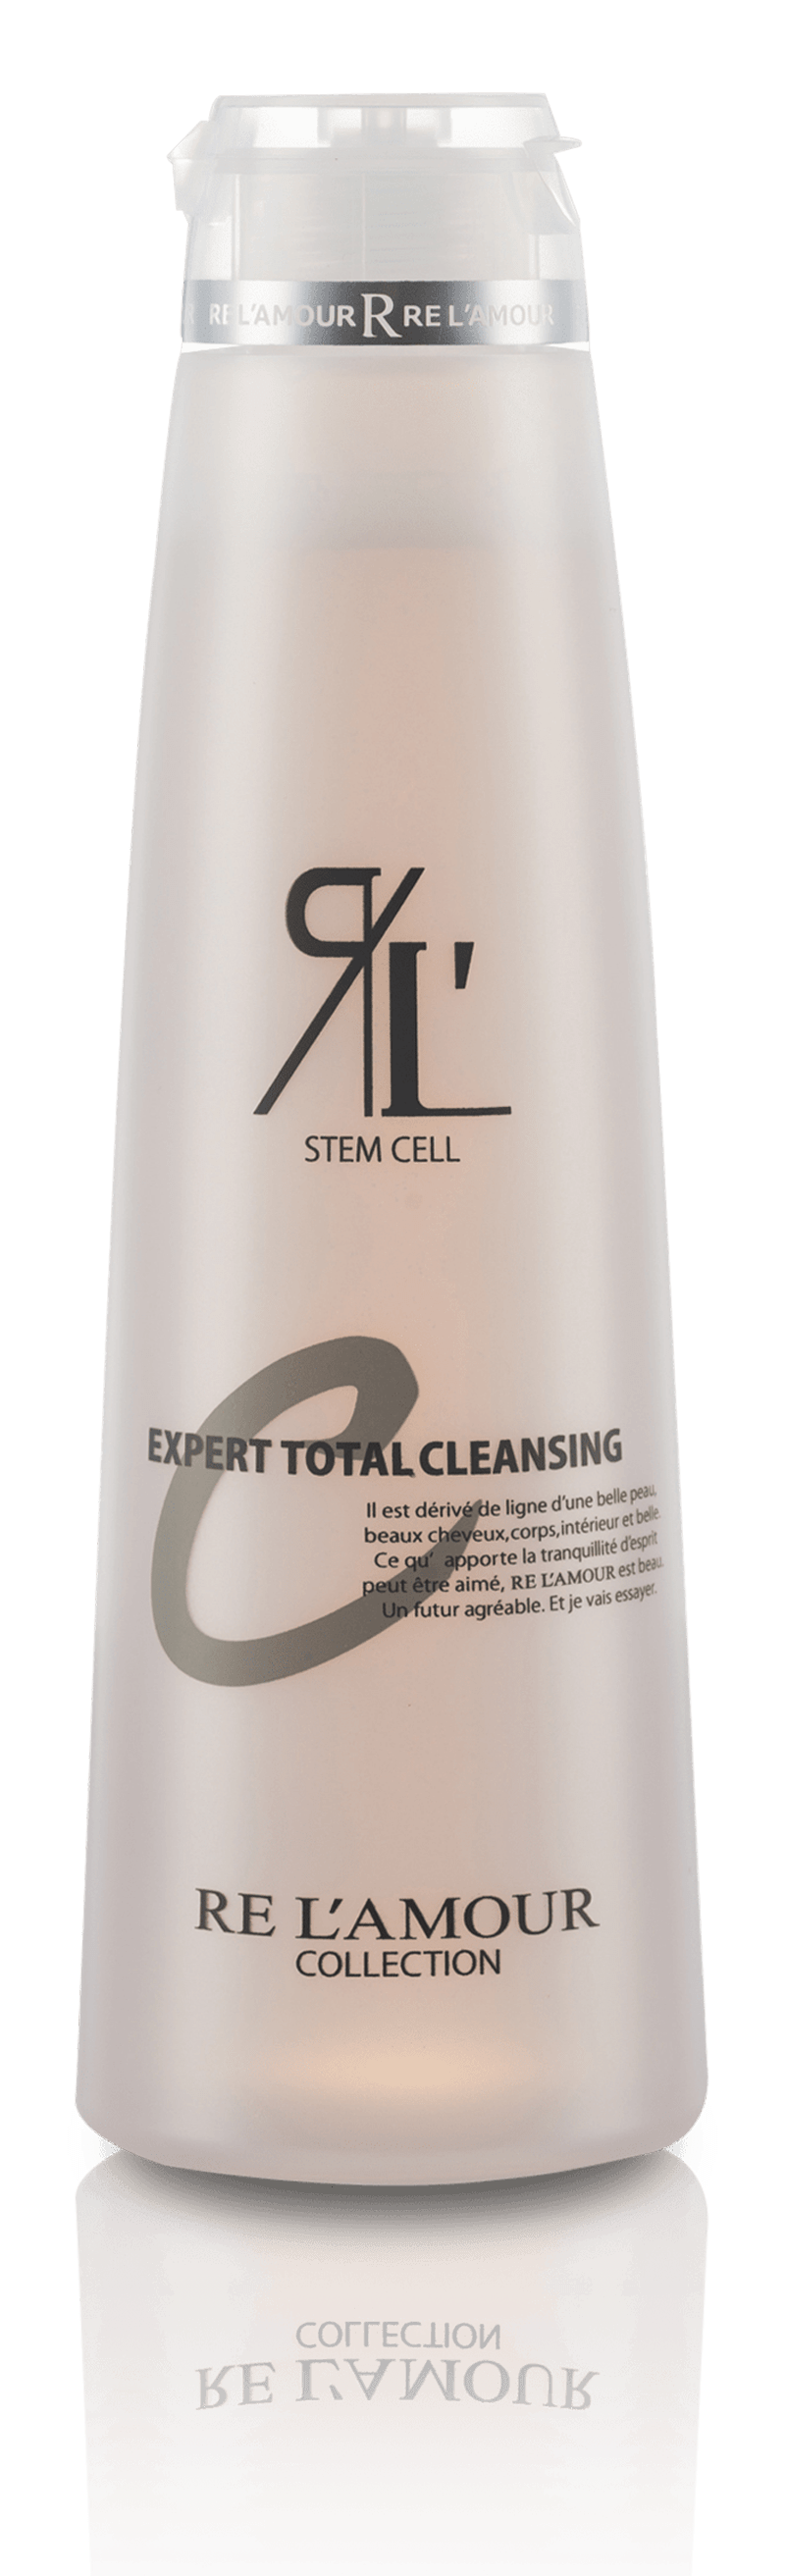 EXPERT TOTAL CLEANSING